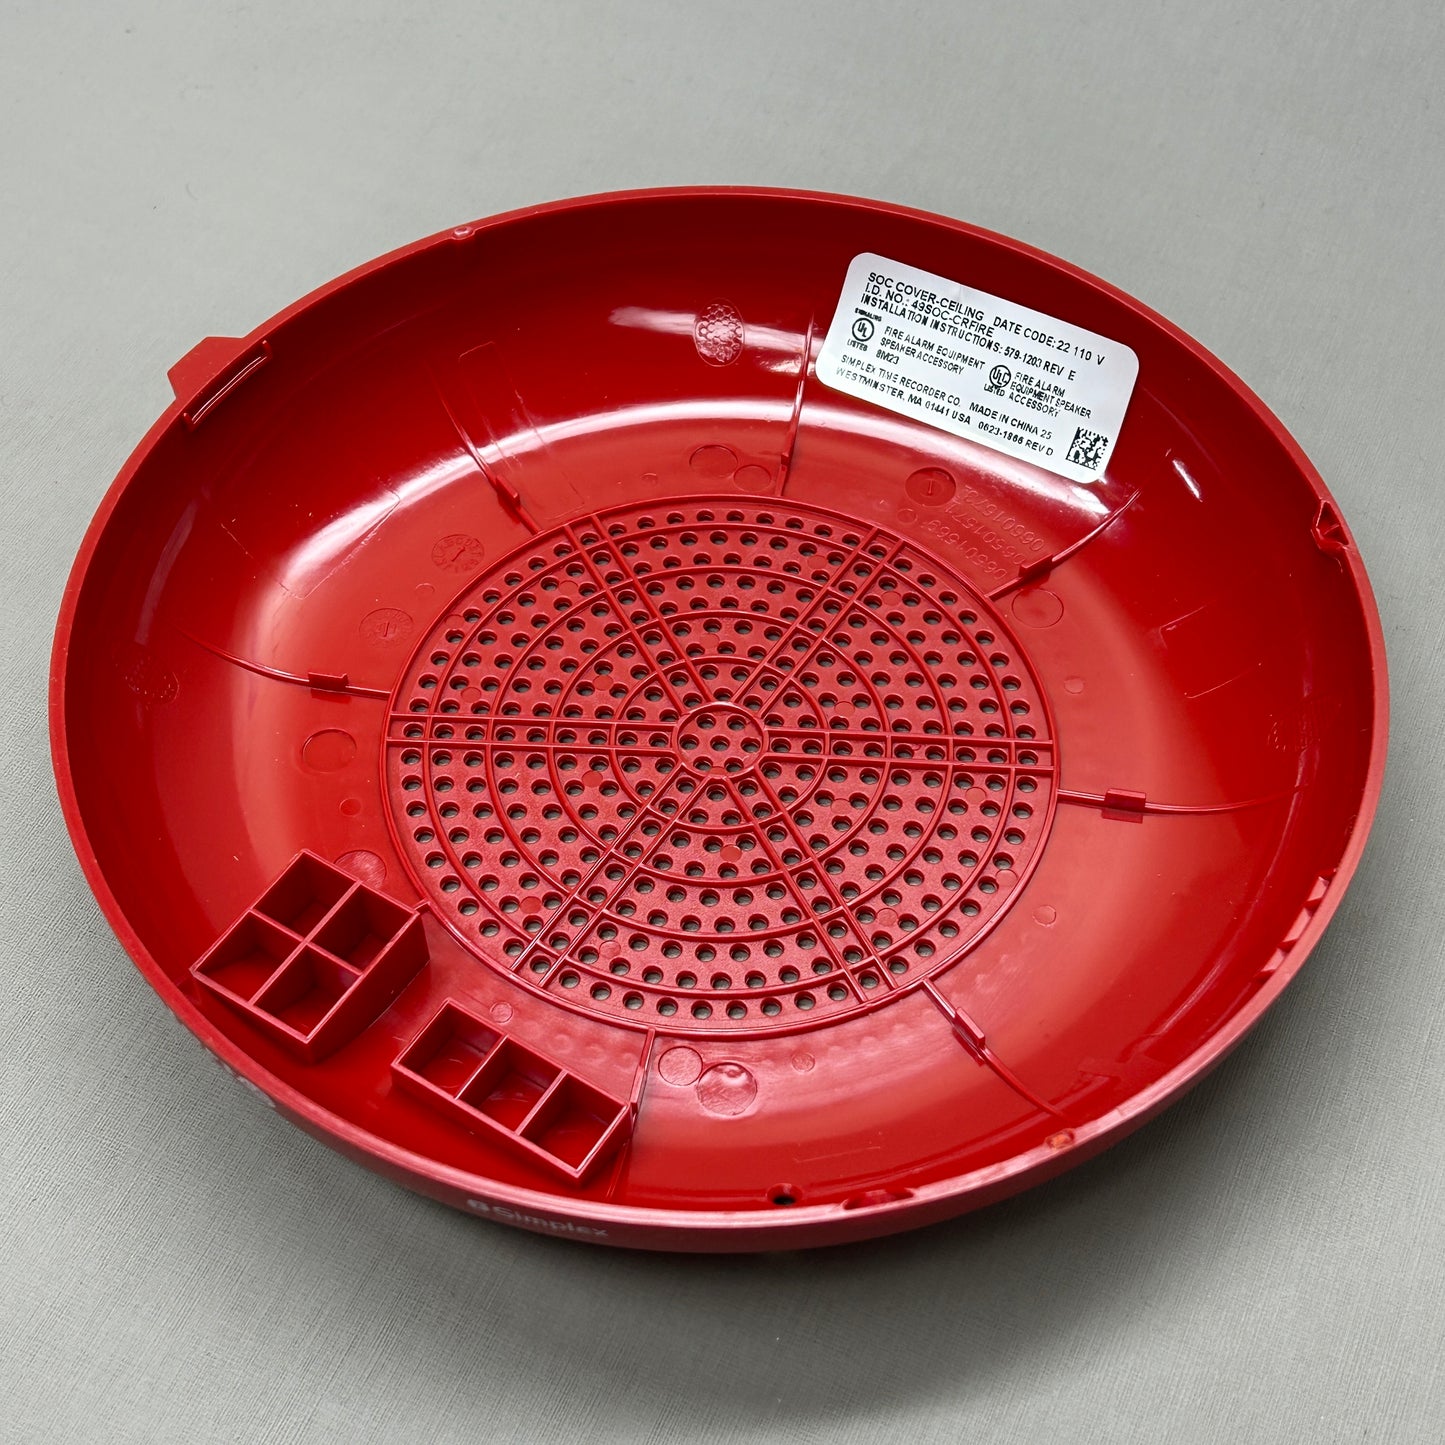 SIMPLEX Ceiling Fire Alarm Speaker Cover Red 49SOC-CRFIRE (New)